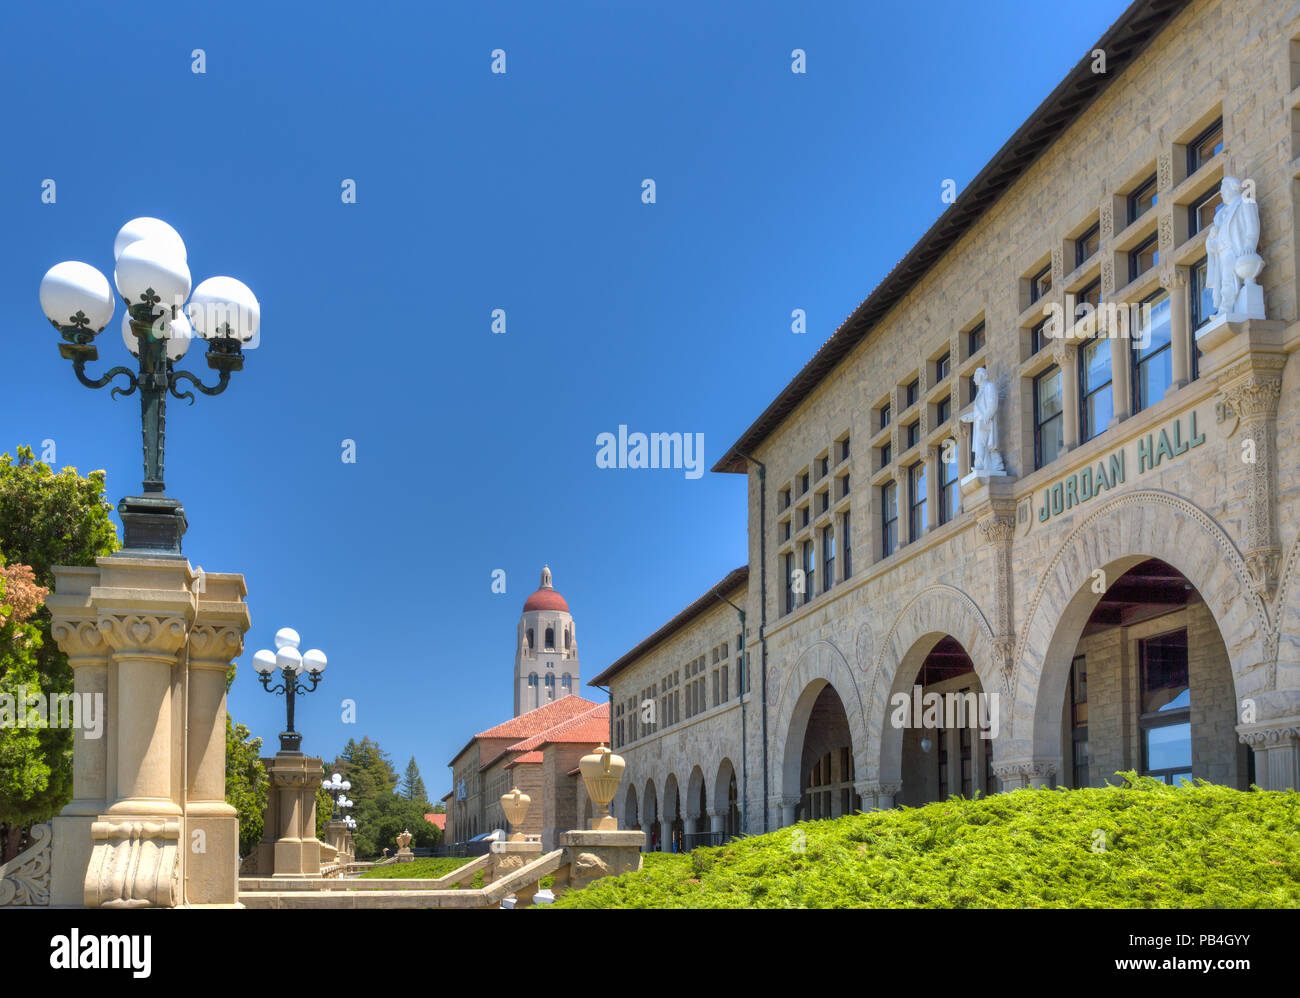 STANFORD, UNITED STATES - July 6: To the backdrop of Hoover Tower, historic Jordan Hall on the campus of Stanford University. July 6, 2013. Stock Photo